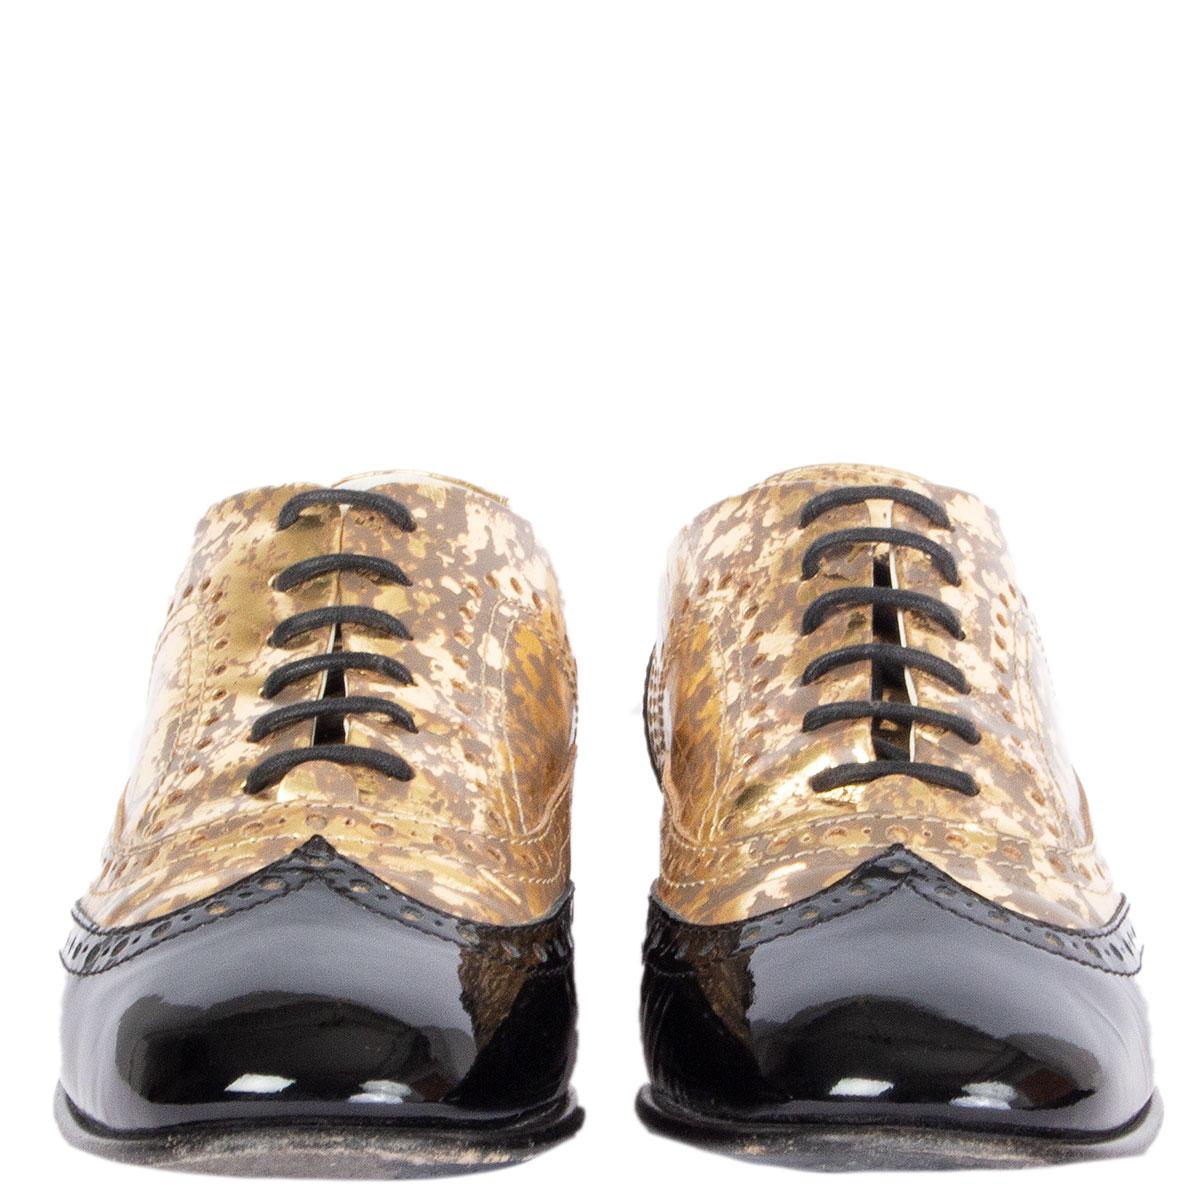 100% authentic Chanel Brogue lace-up Oxford shoes in gold-tone metallic leather and black patent leather brogue detailing tip and heel. Have been worn and are in excellent condition. Come with dust bags. 

Imprinted Size	39.5
Shoe Size	39.5
Inside